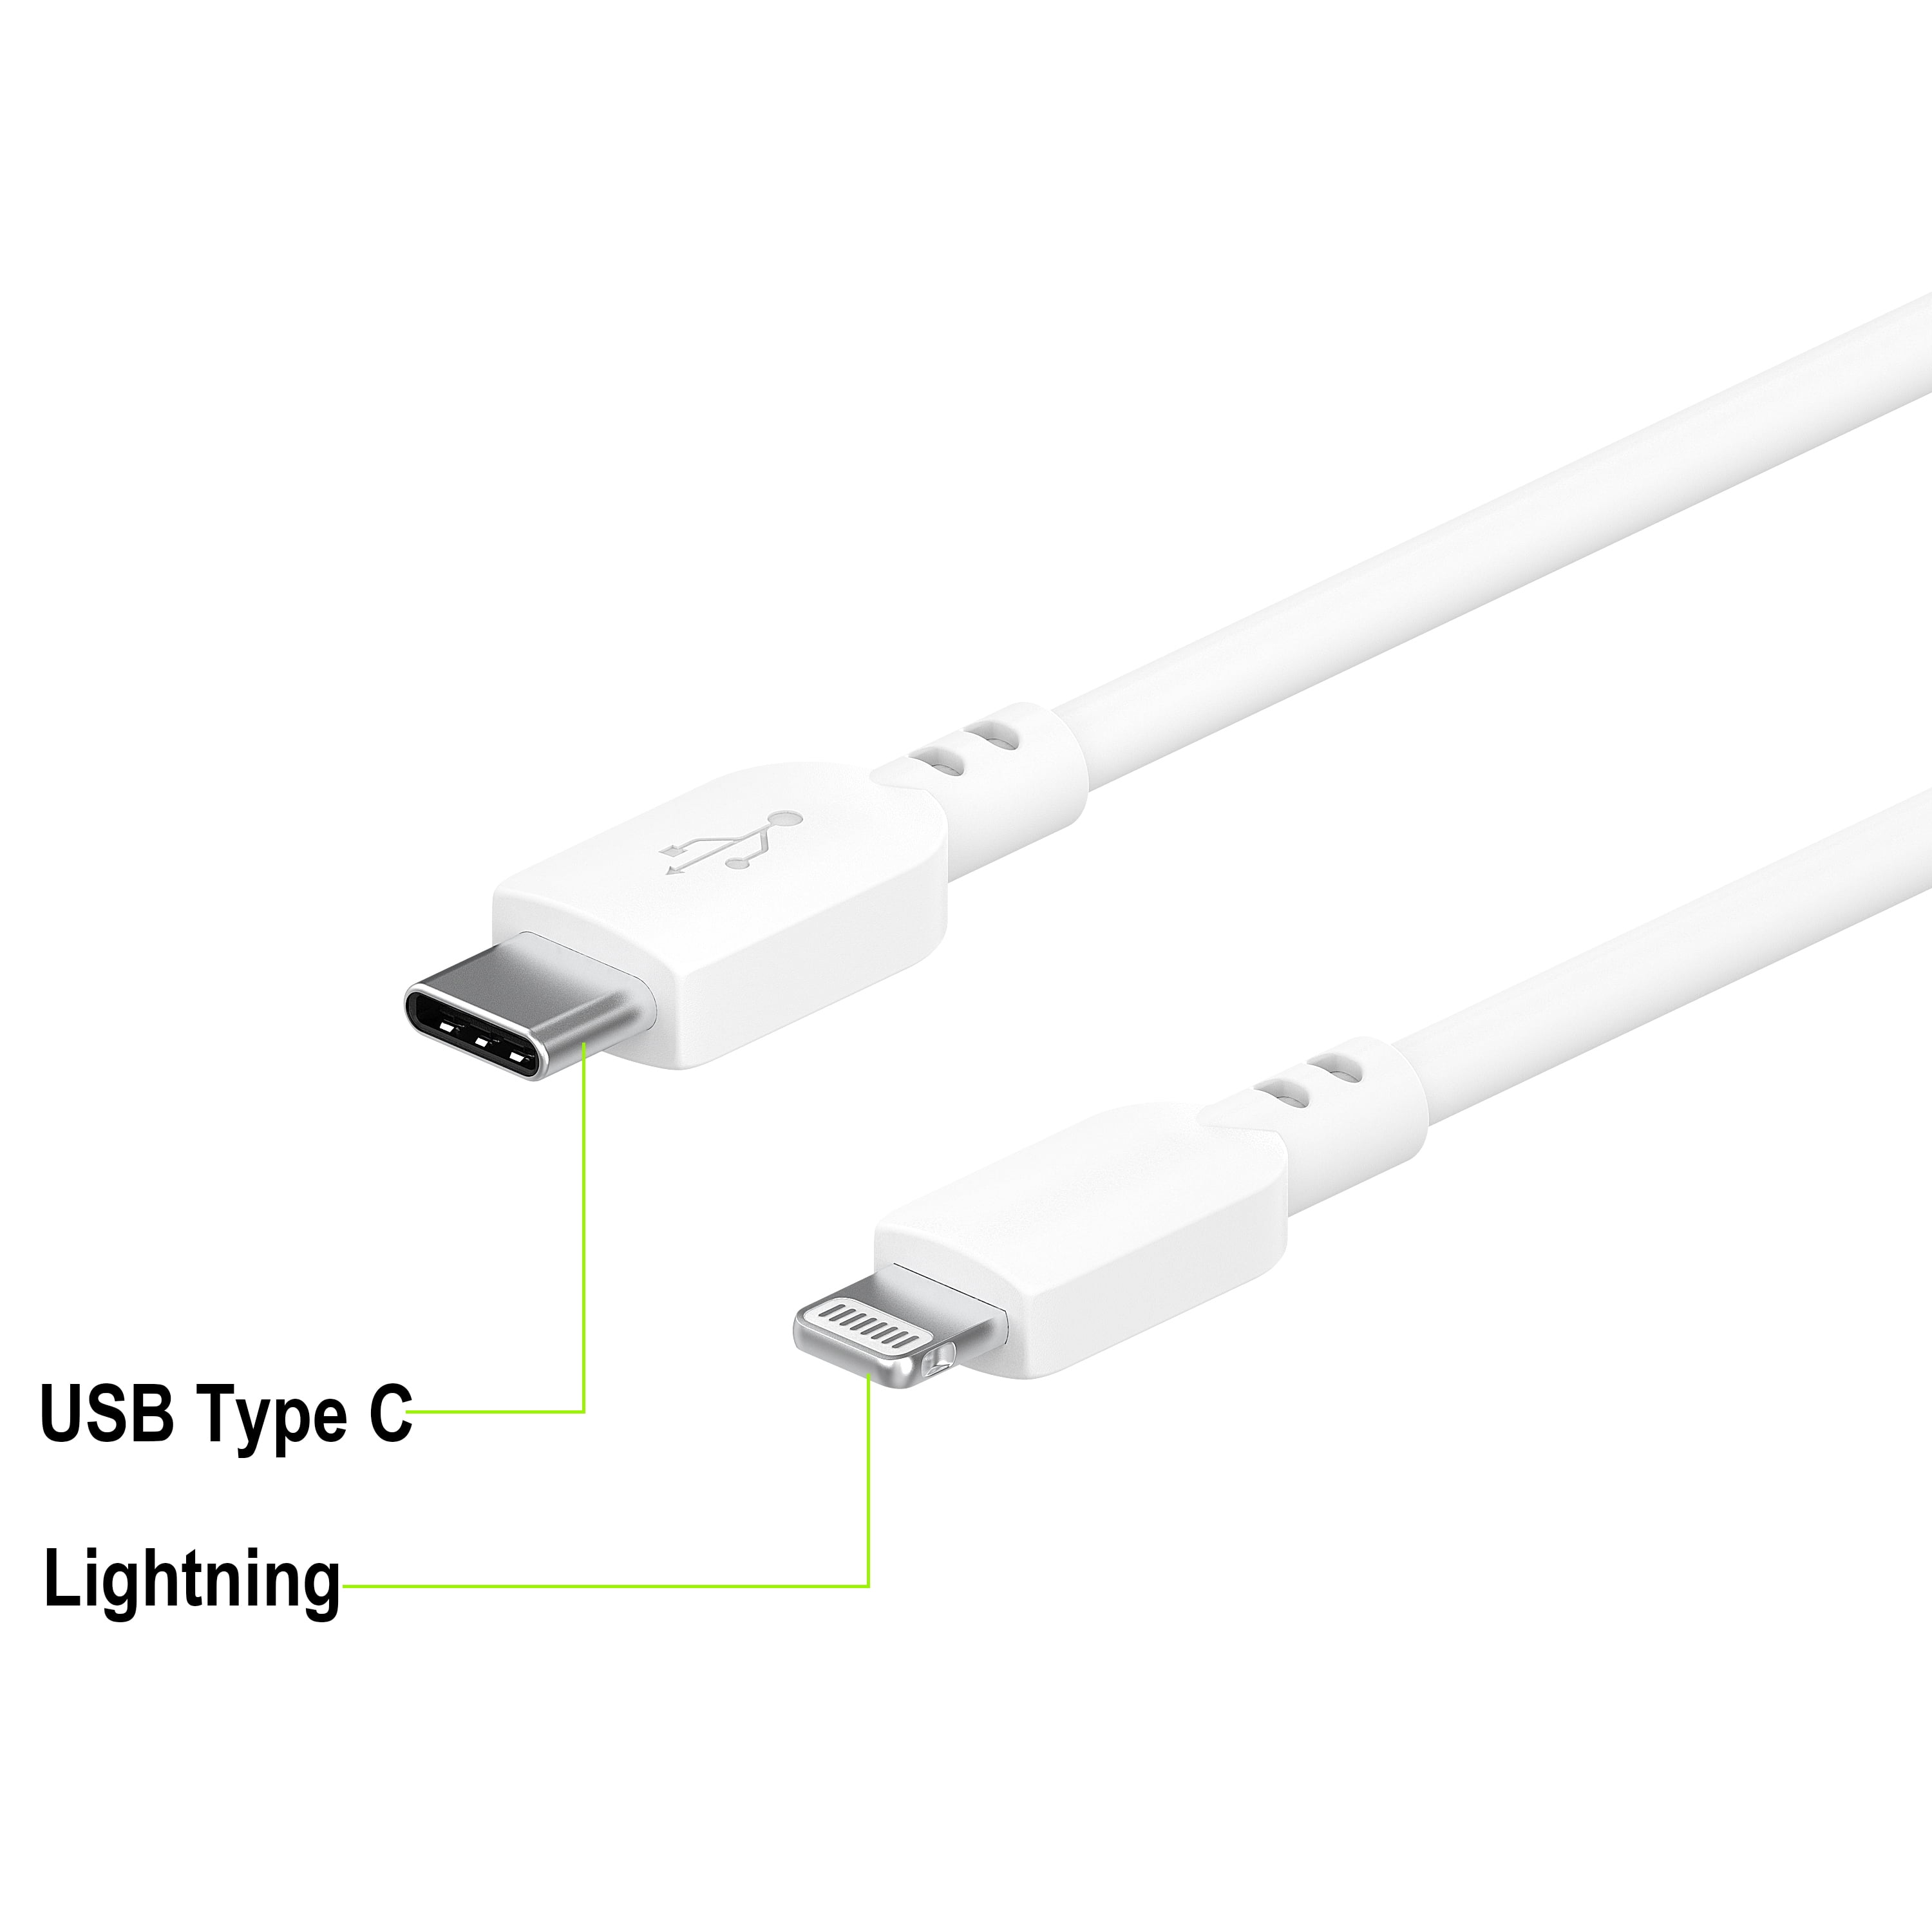 Onn. 3 feet Lightning to USB-C Charging and Data Cable for iPhone